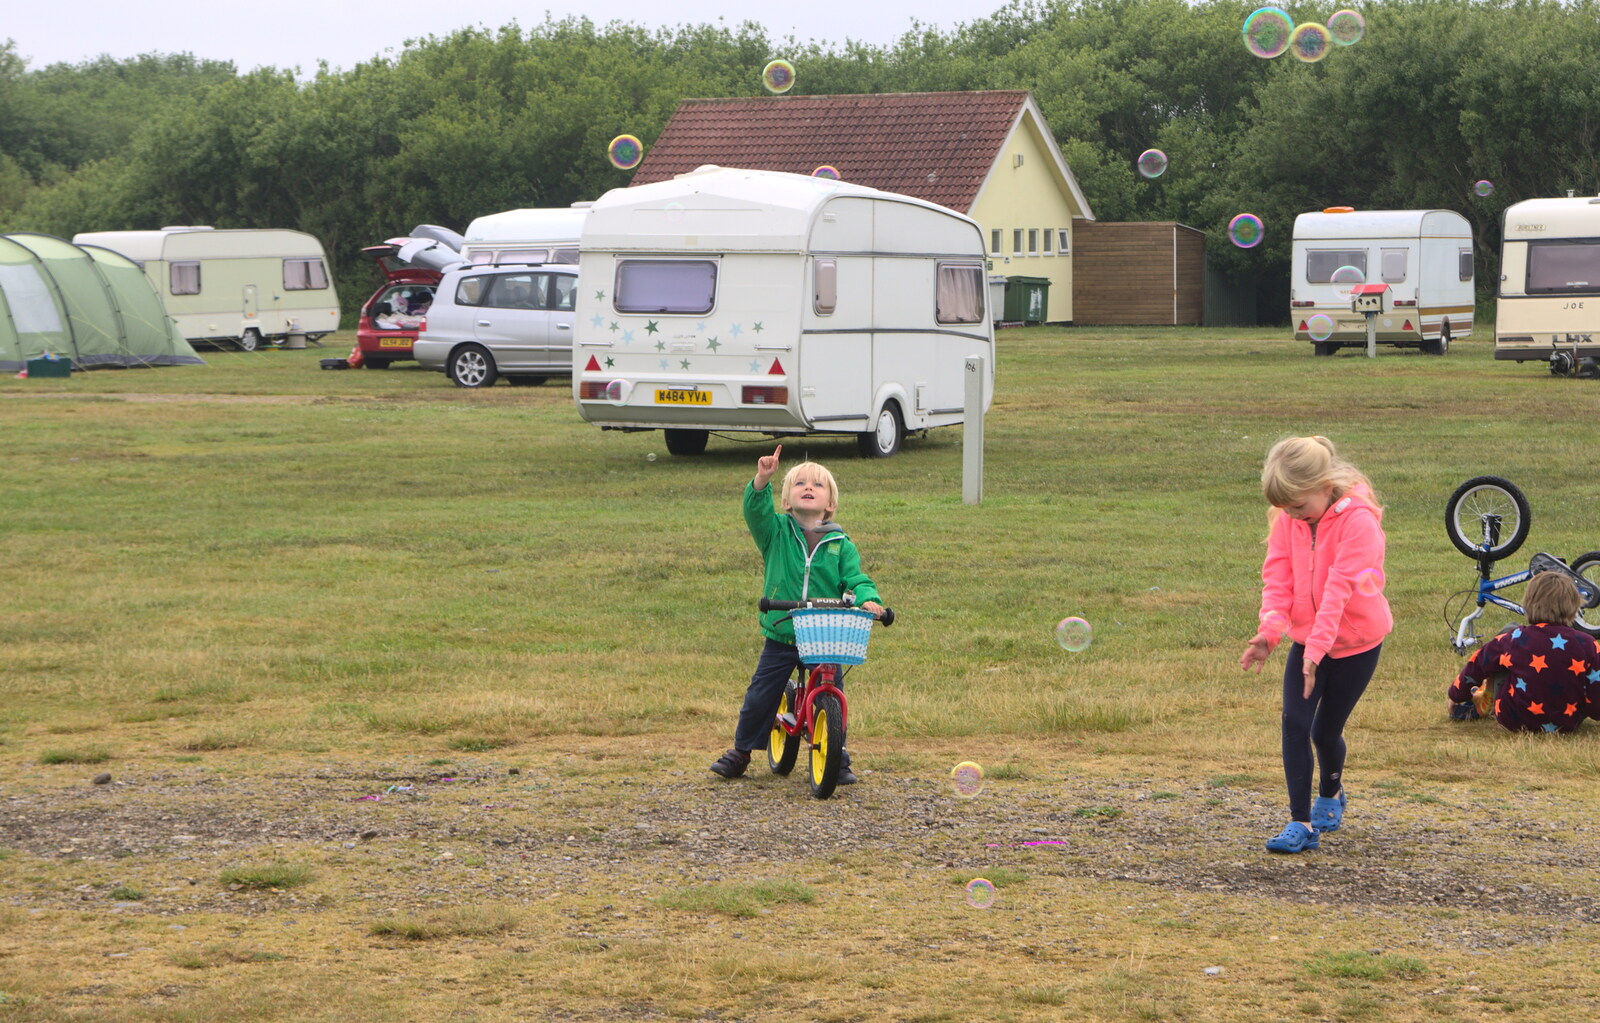 It's time for bubbles from A Wet Weekend of Camping, Waxham Sands, Norfolk - 13th June 2015